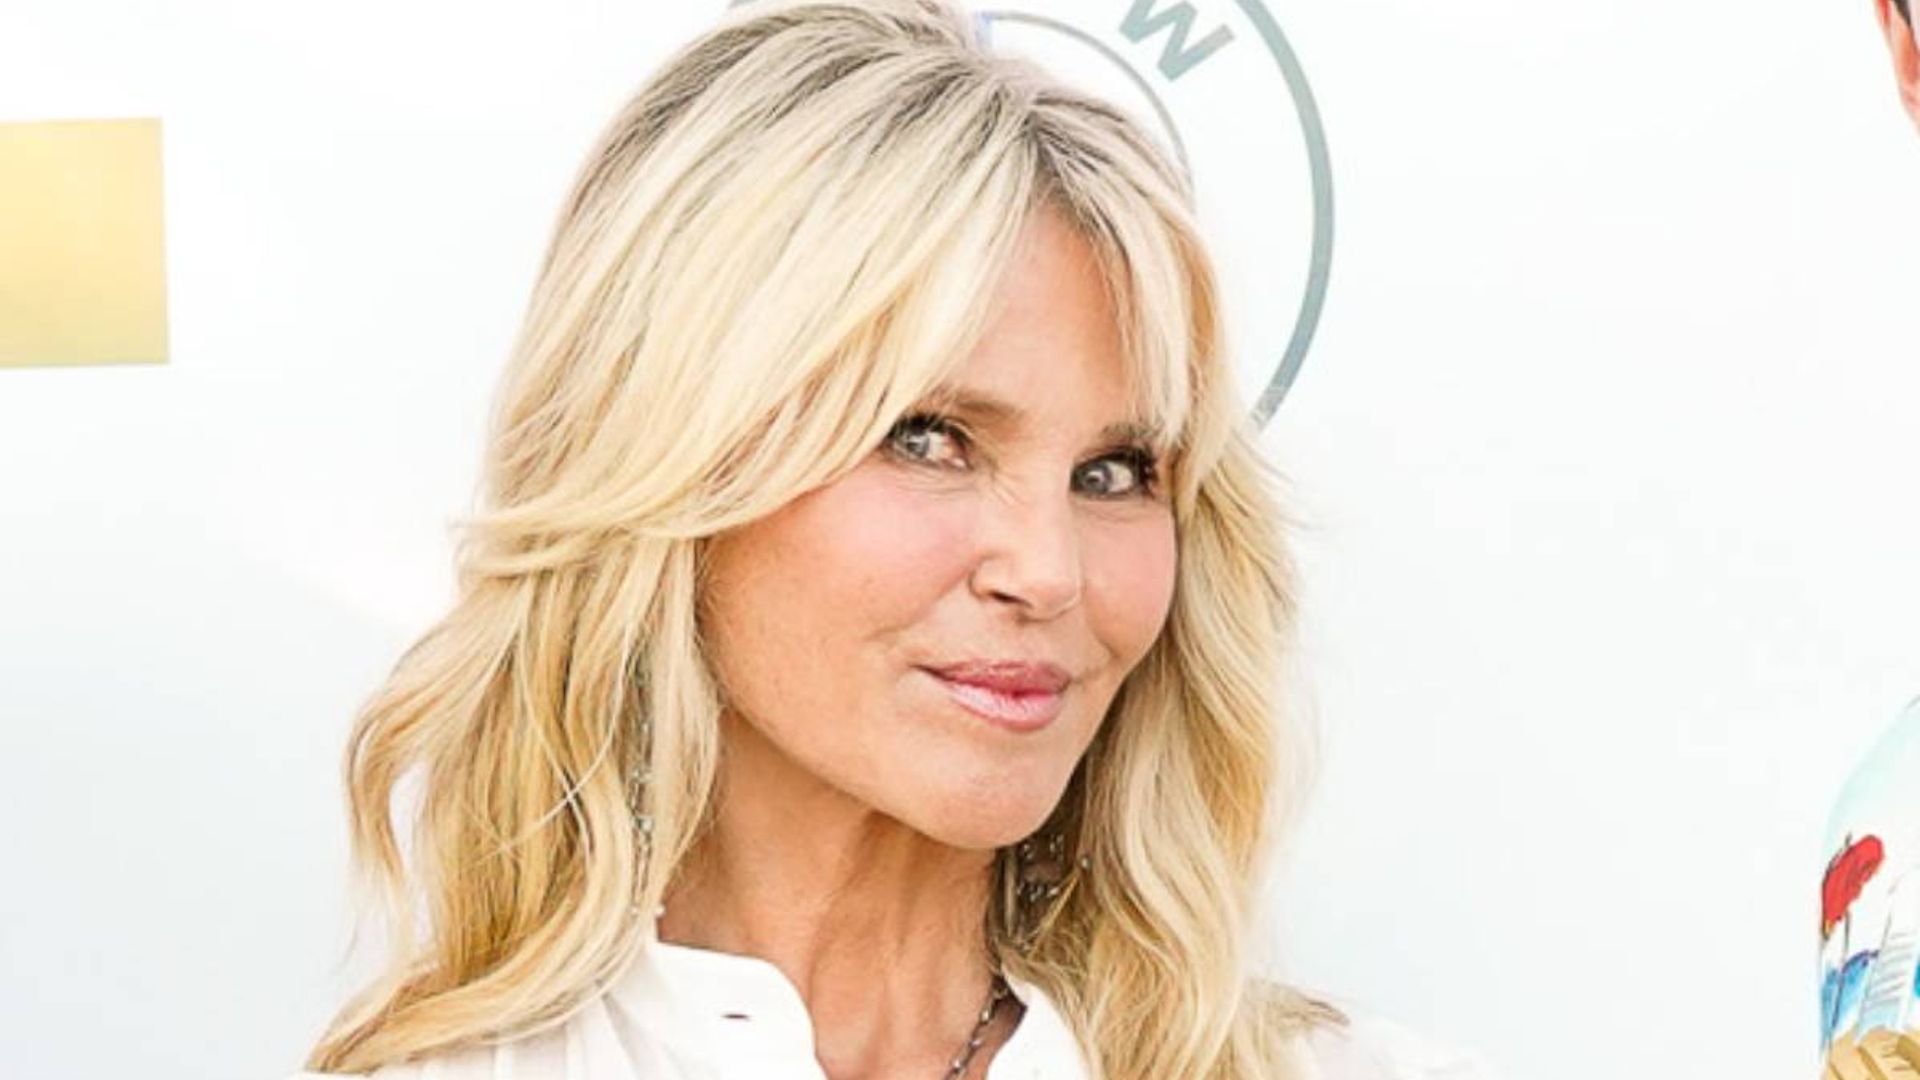 Christie Brinkley updates fans about safety after risky beach adventure goes wrong